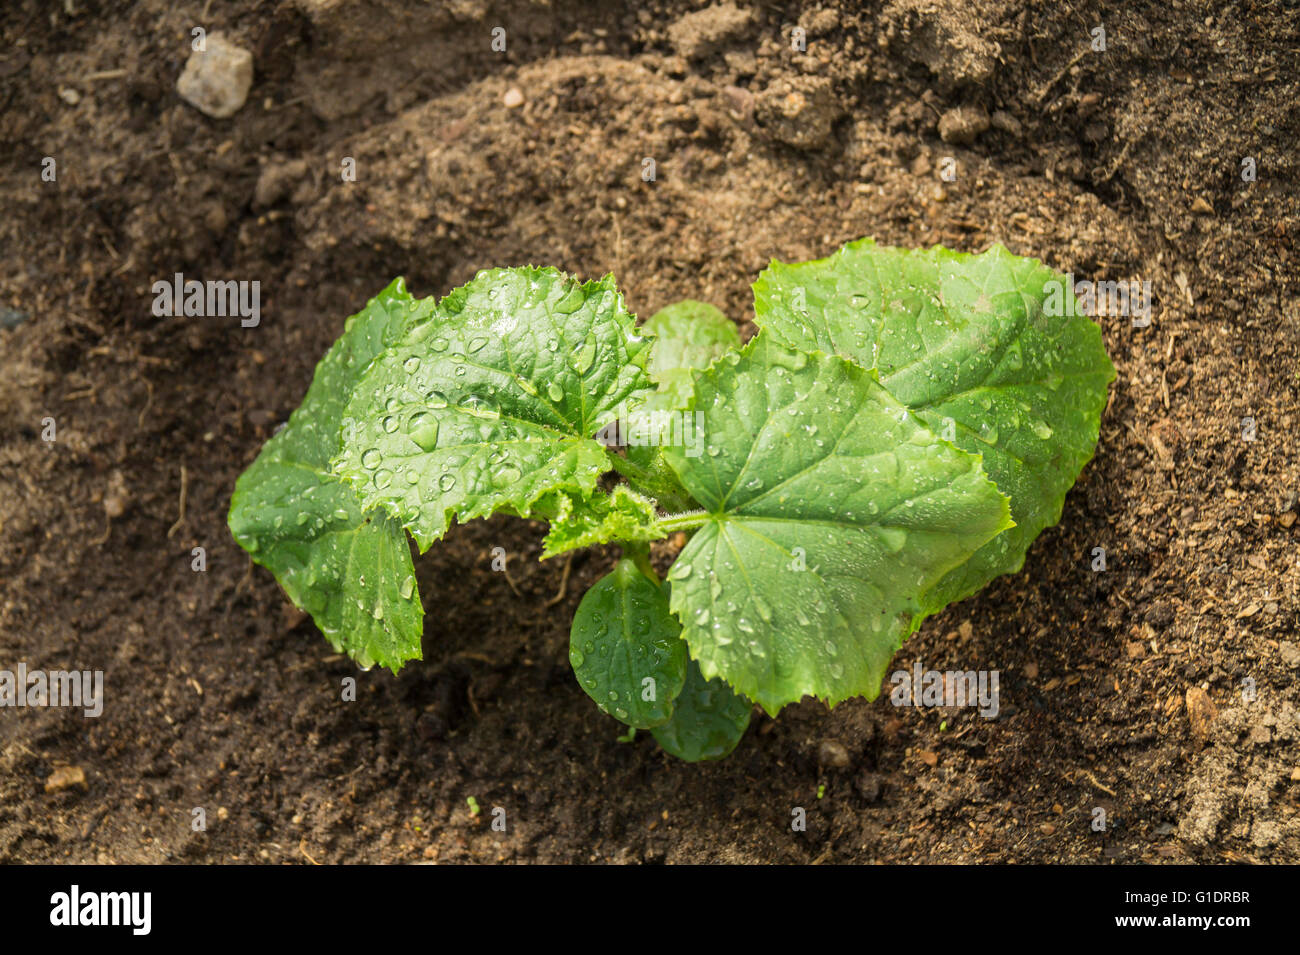 Green sprout with sheet cucumber grows on land by springtime Stock Photo